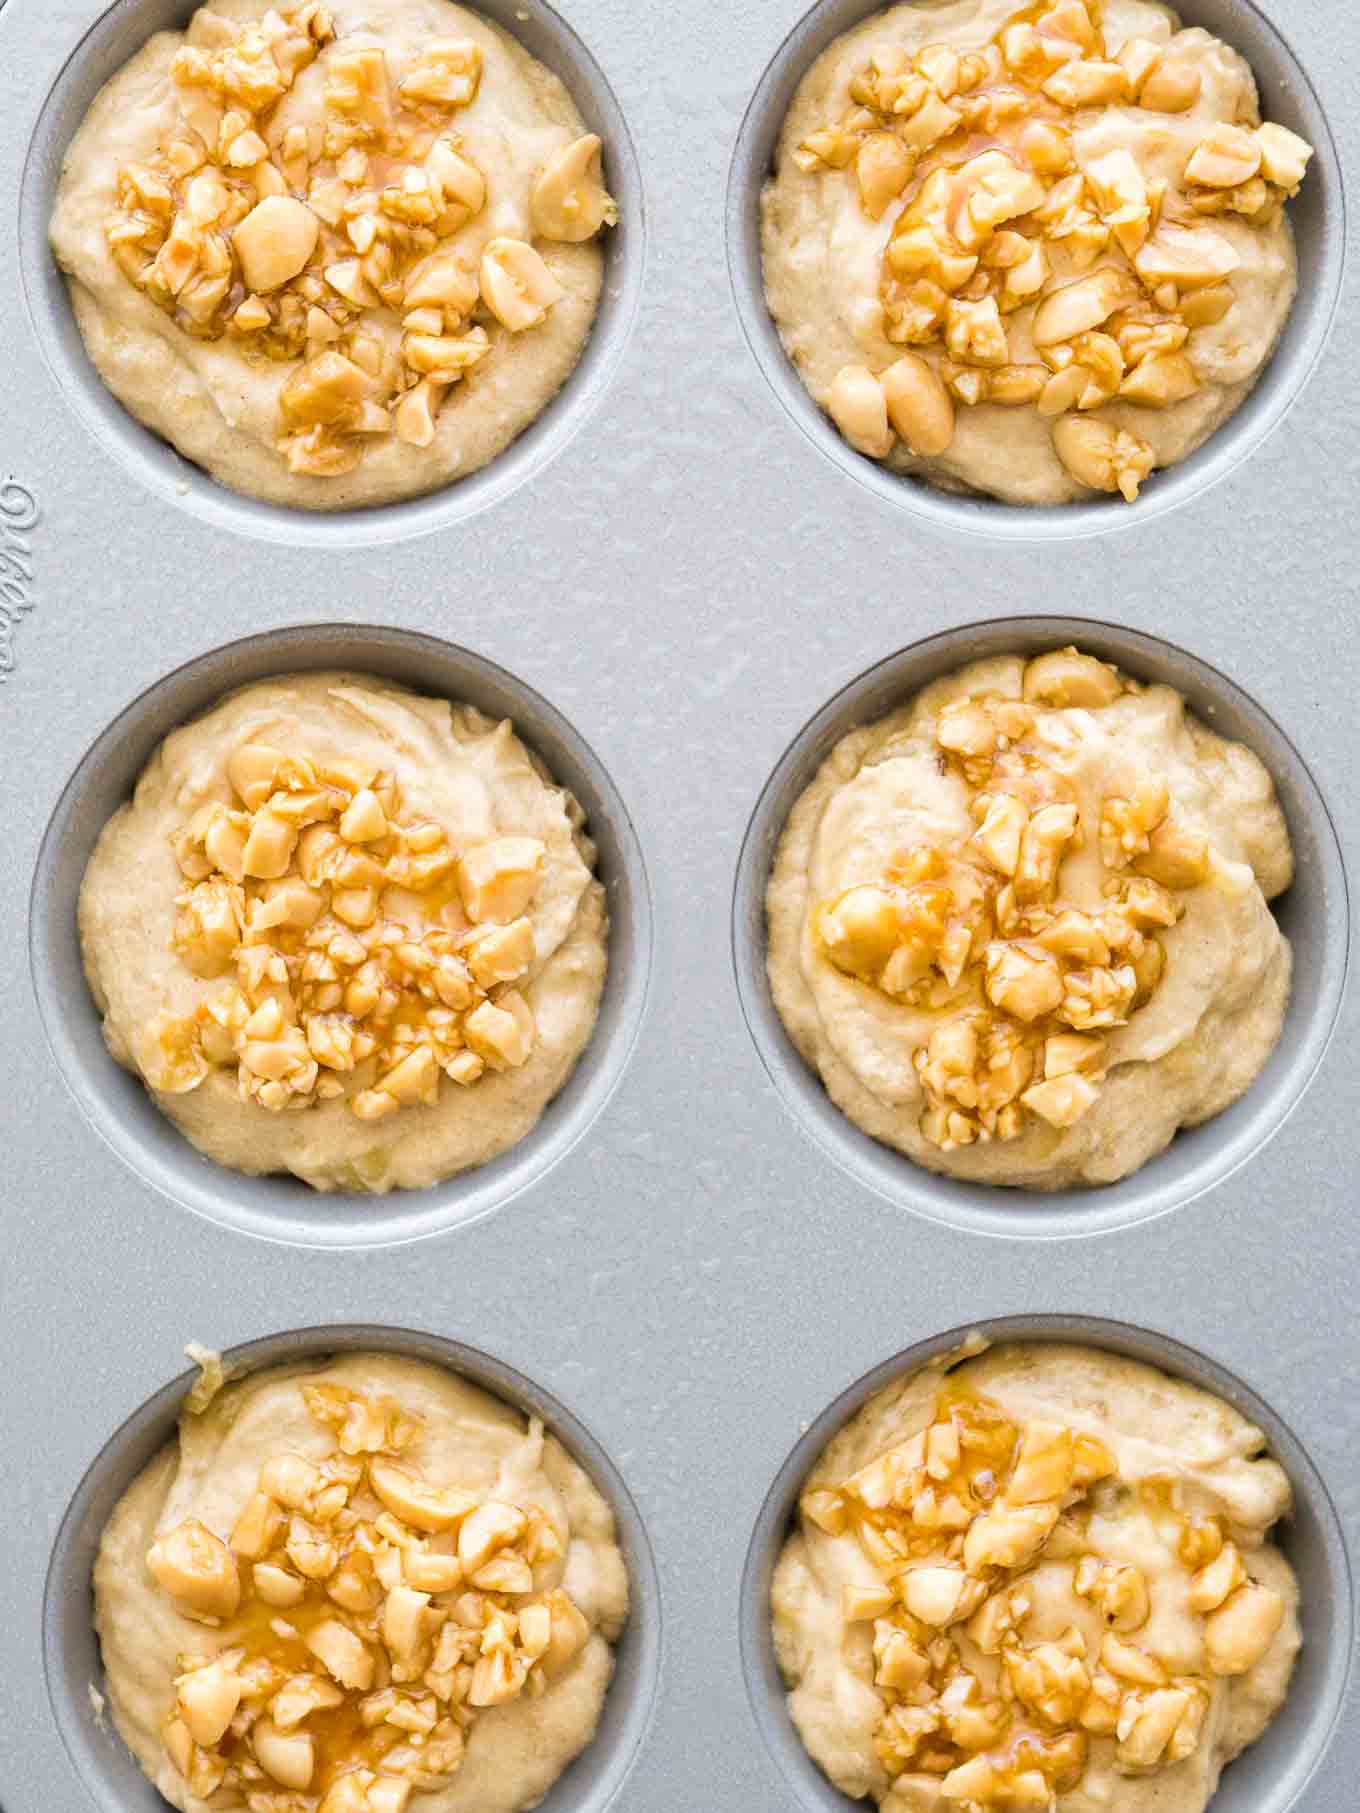 Top-down shot of a grey muffin pan with muffin batter topped with peanuts before baking.